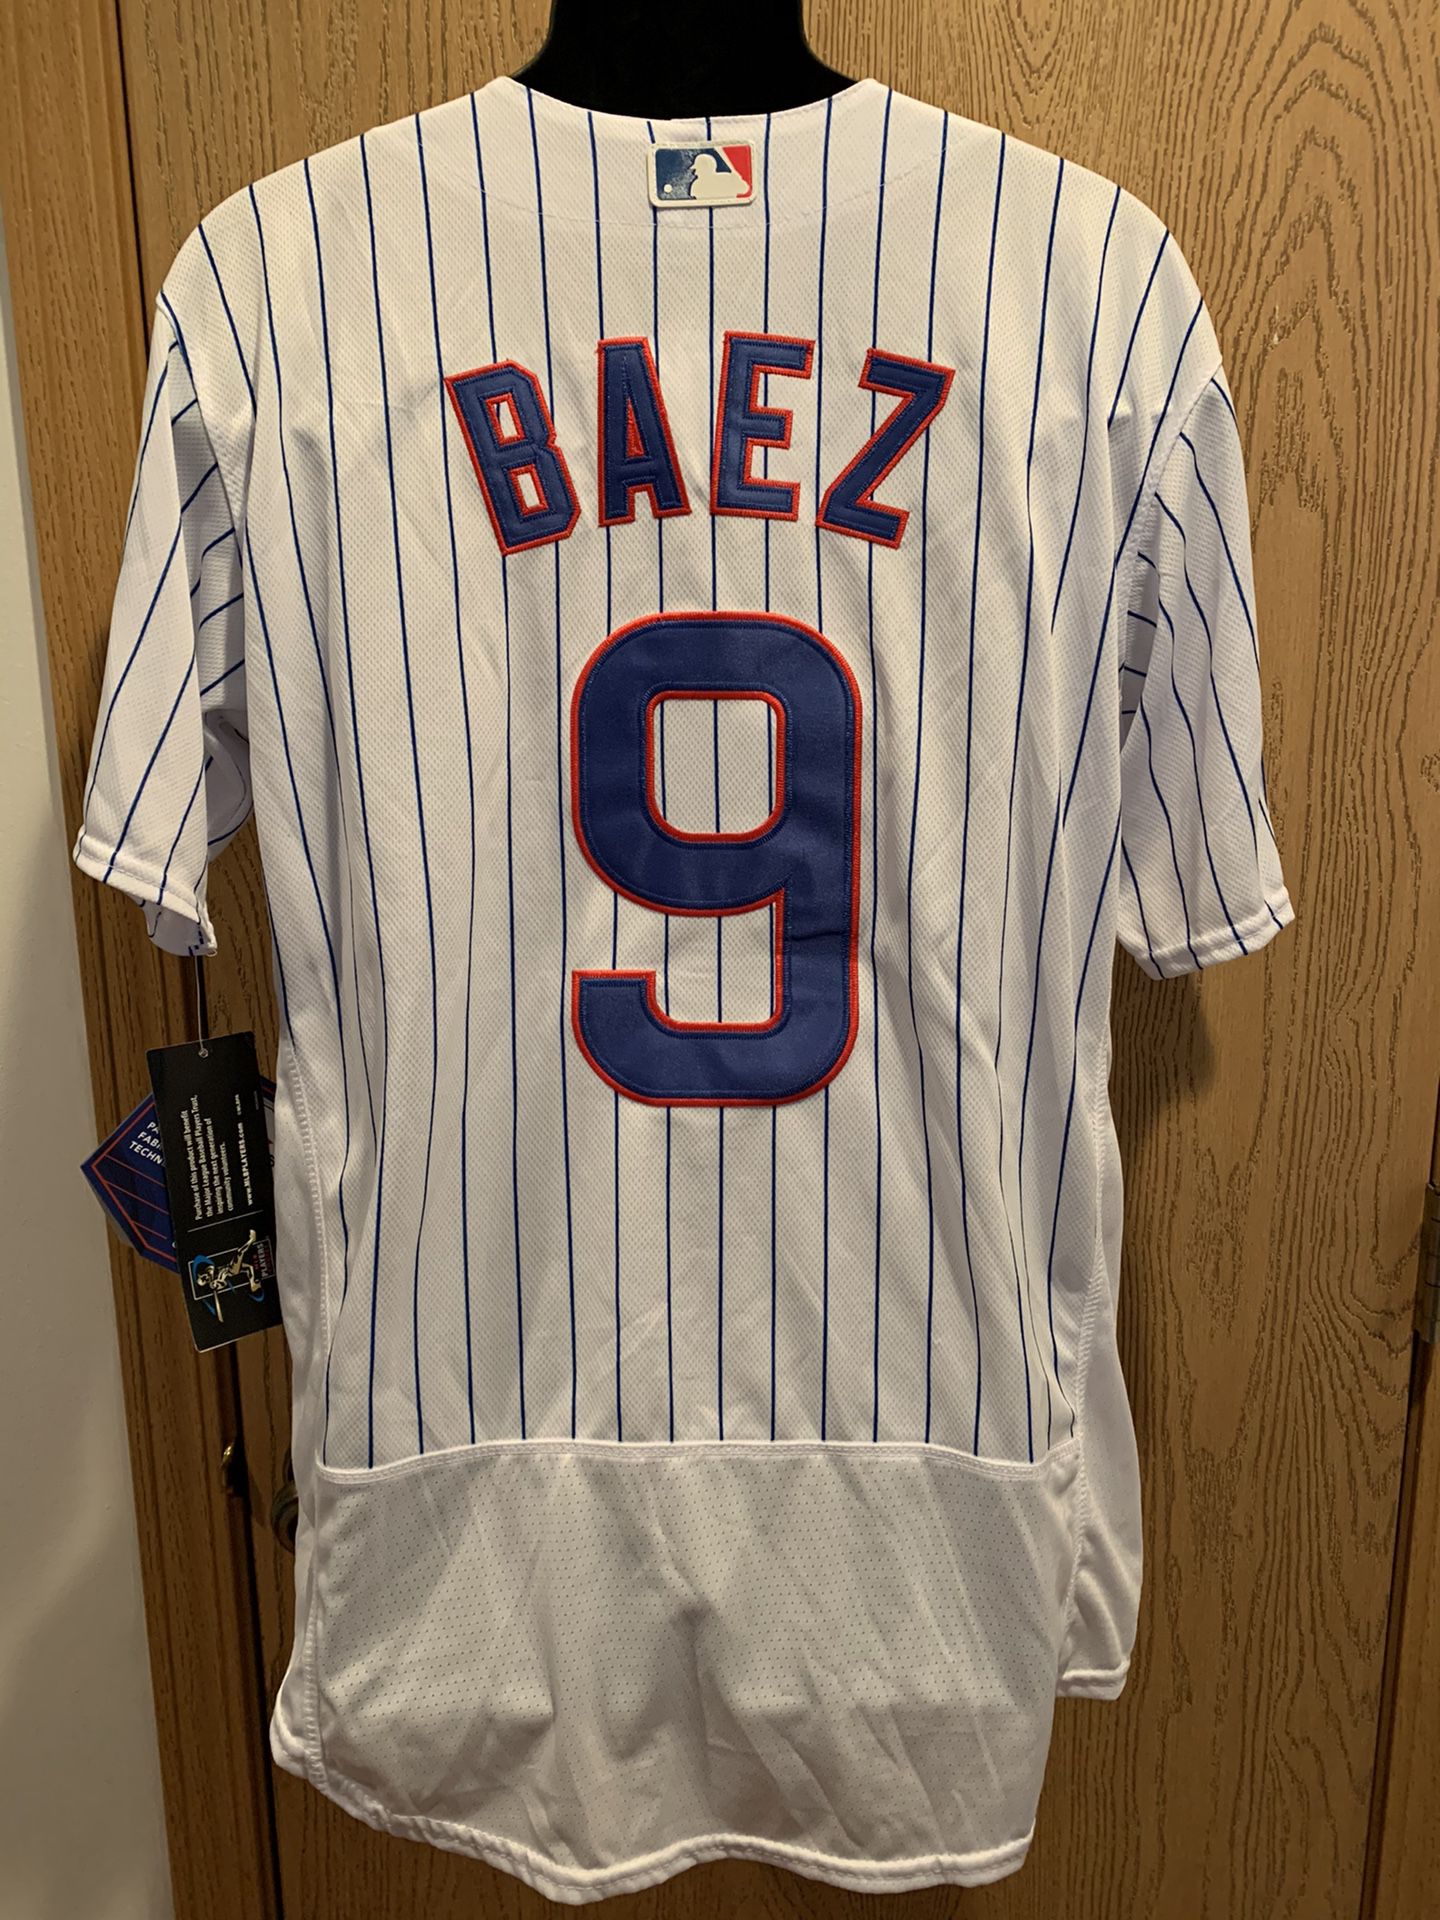 Chicago Cubs Baez #9 Jersey by Majestic